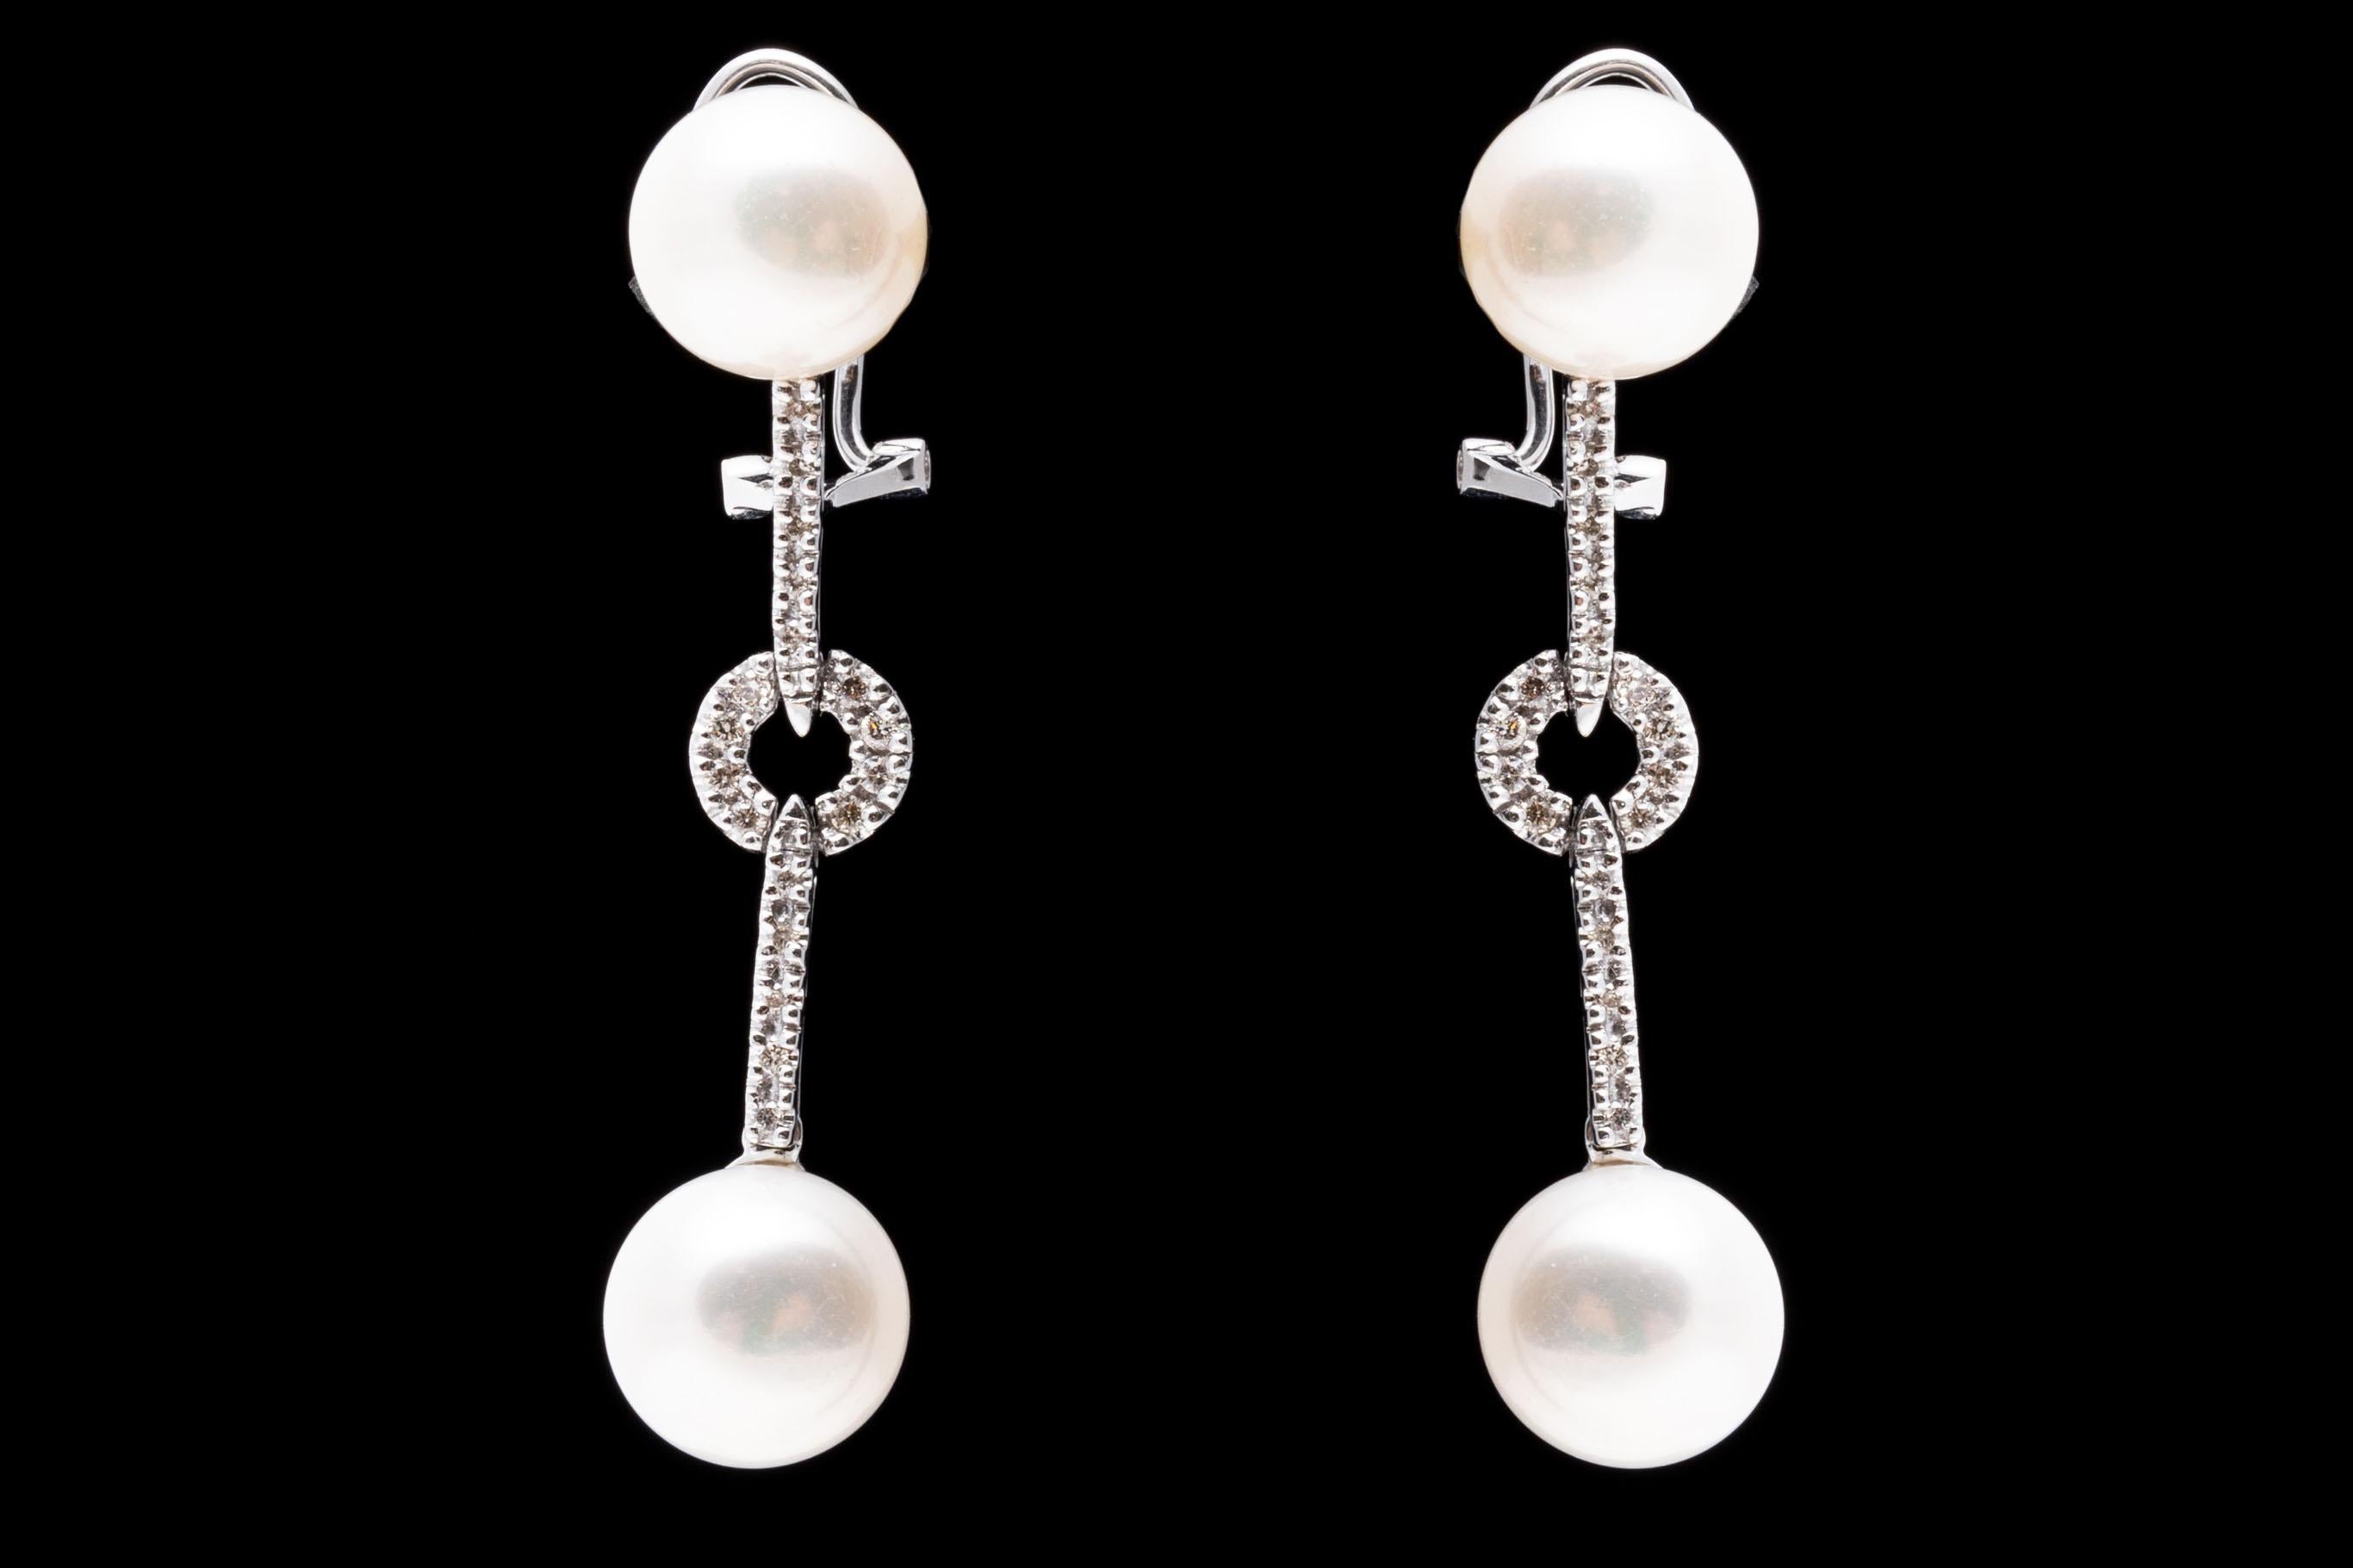 14K White Gold Drop Style Earrings with Pearls and Diamonds For Sale 4